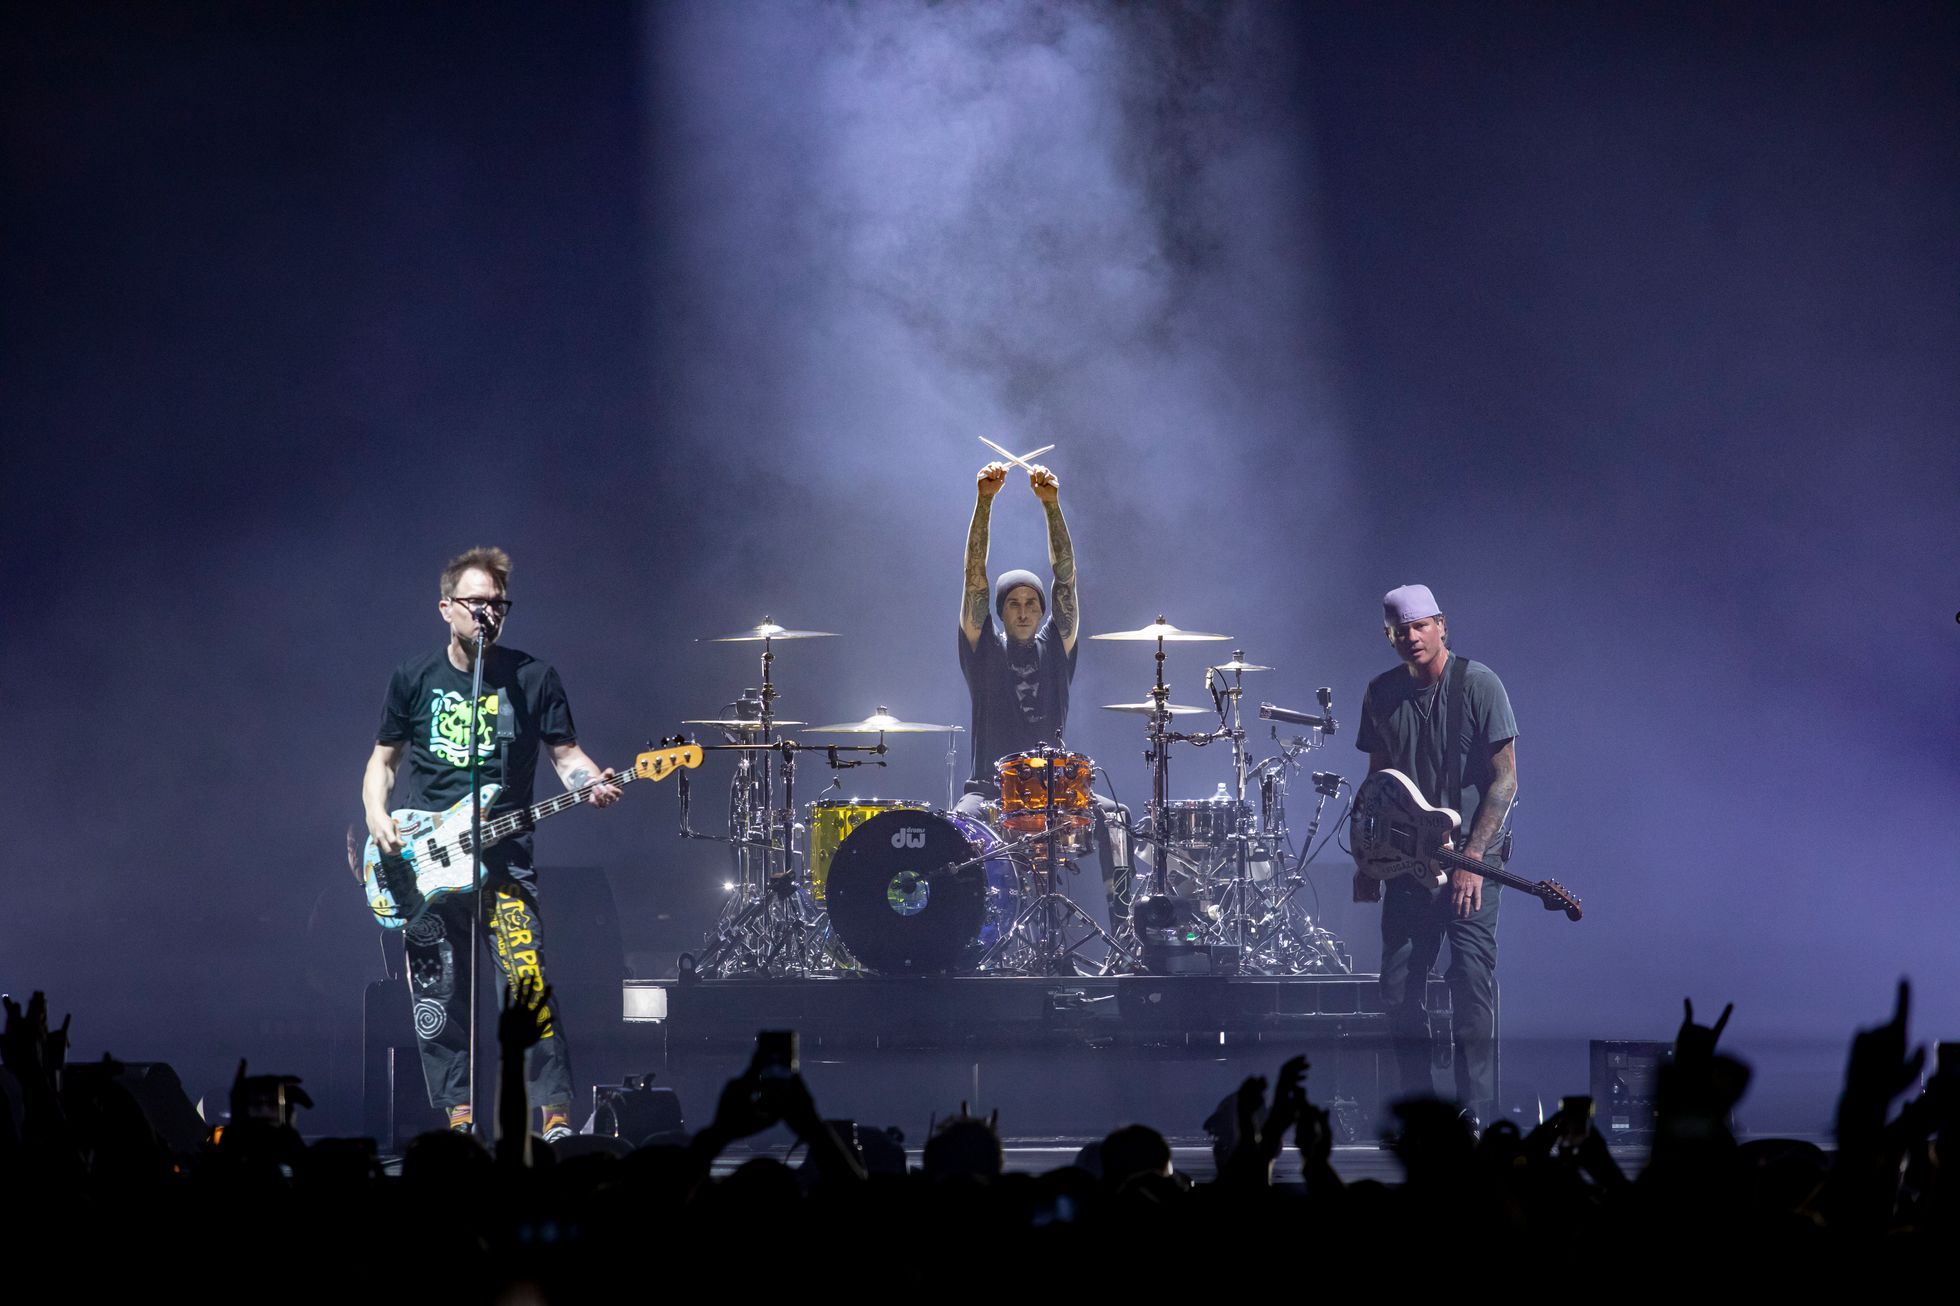 Review of the Blink-182 concert in Prague’s O2 arena